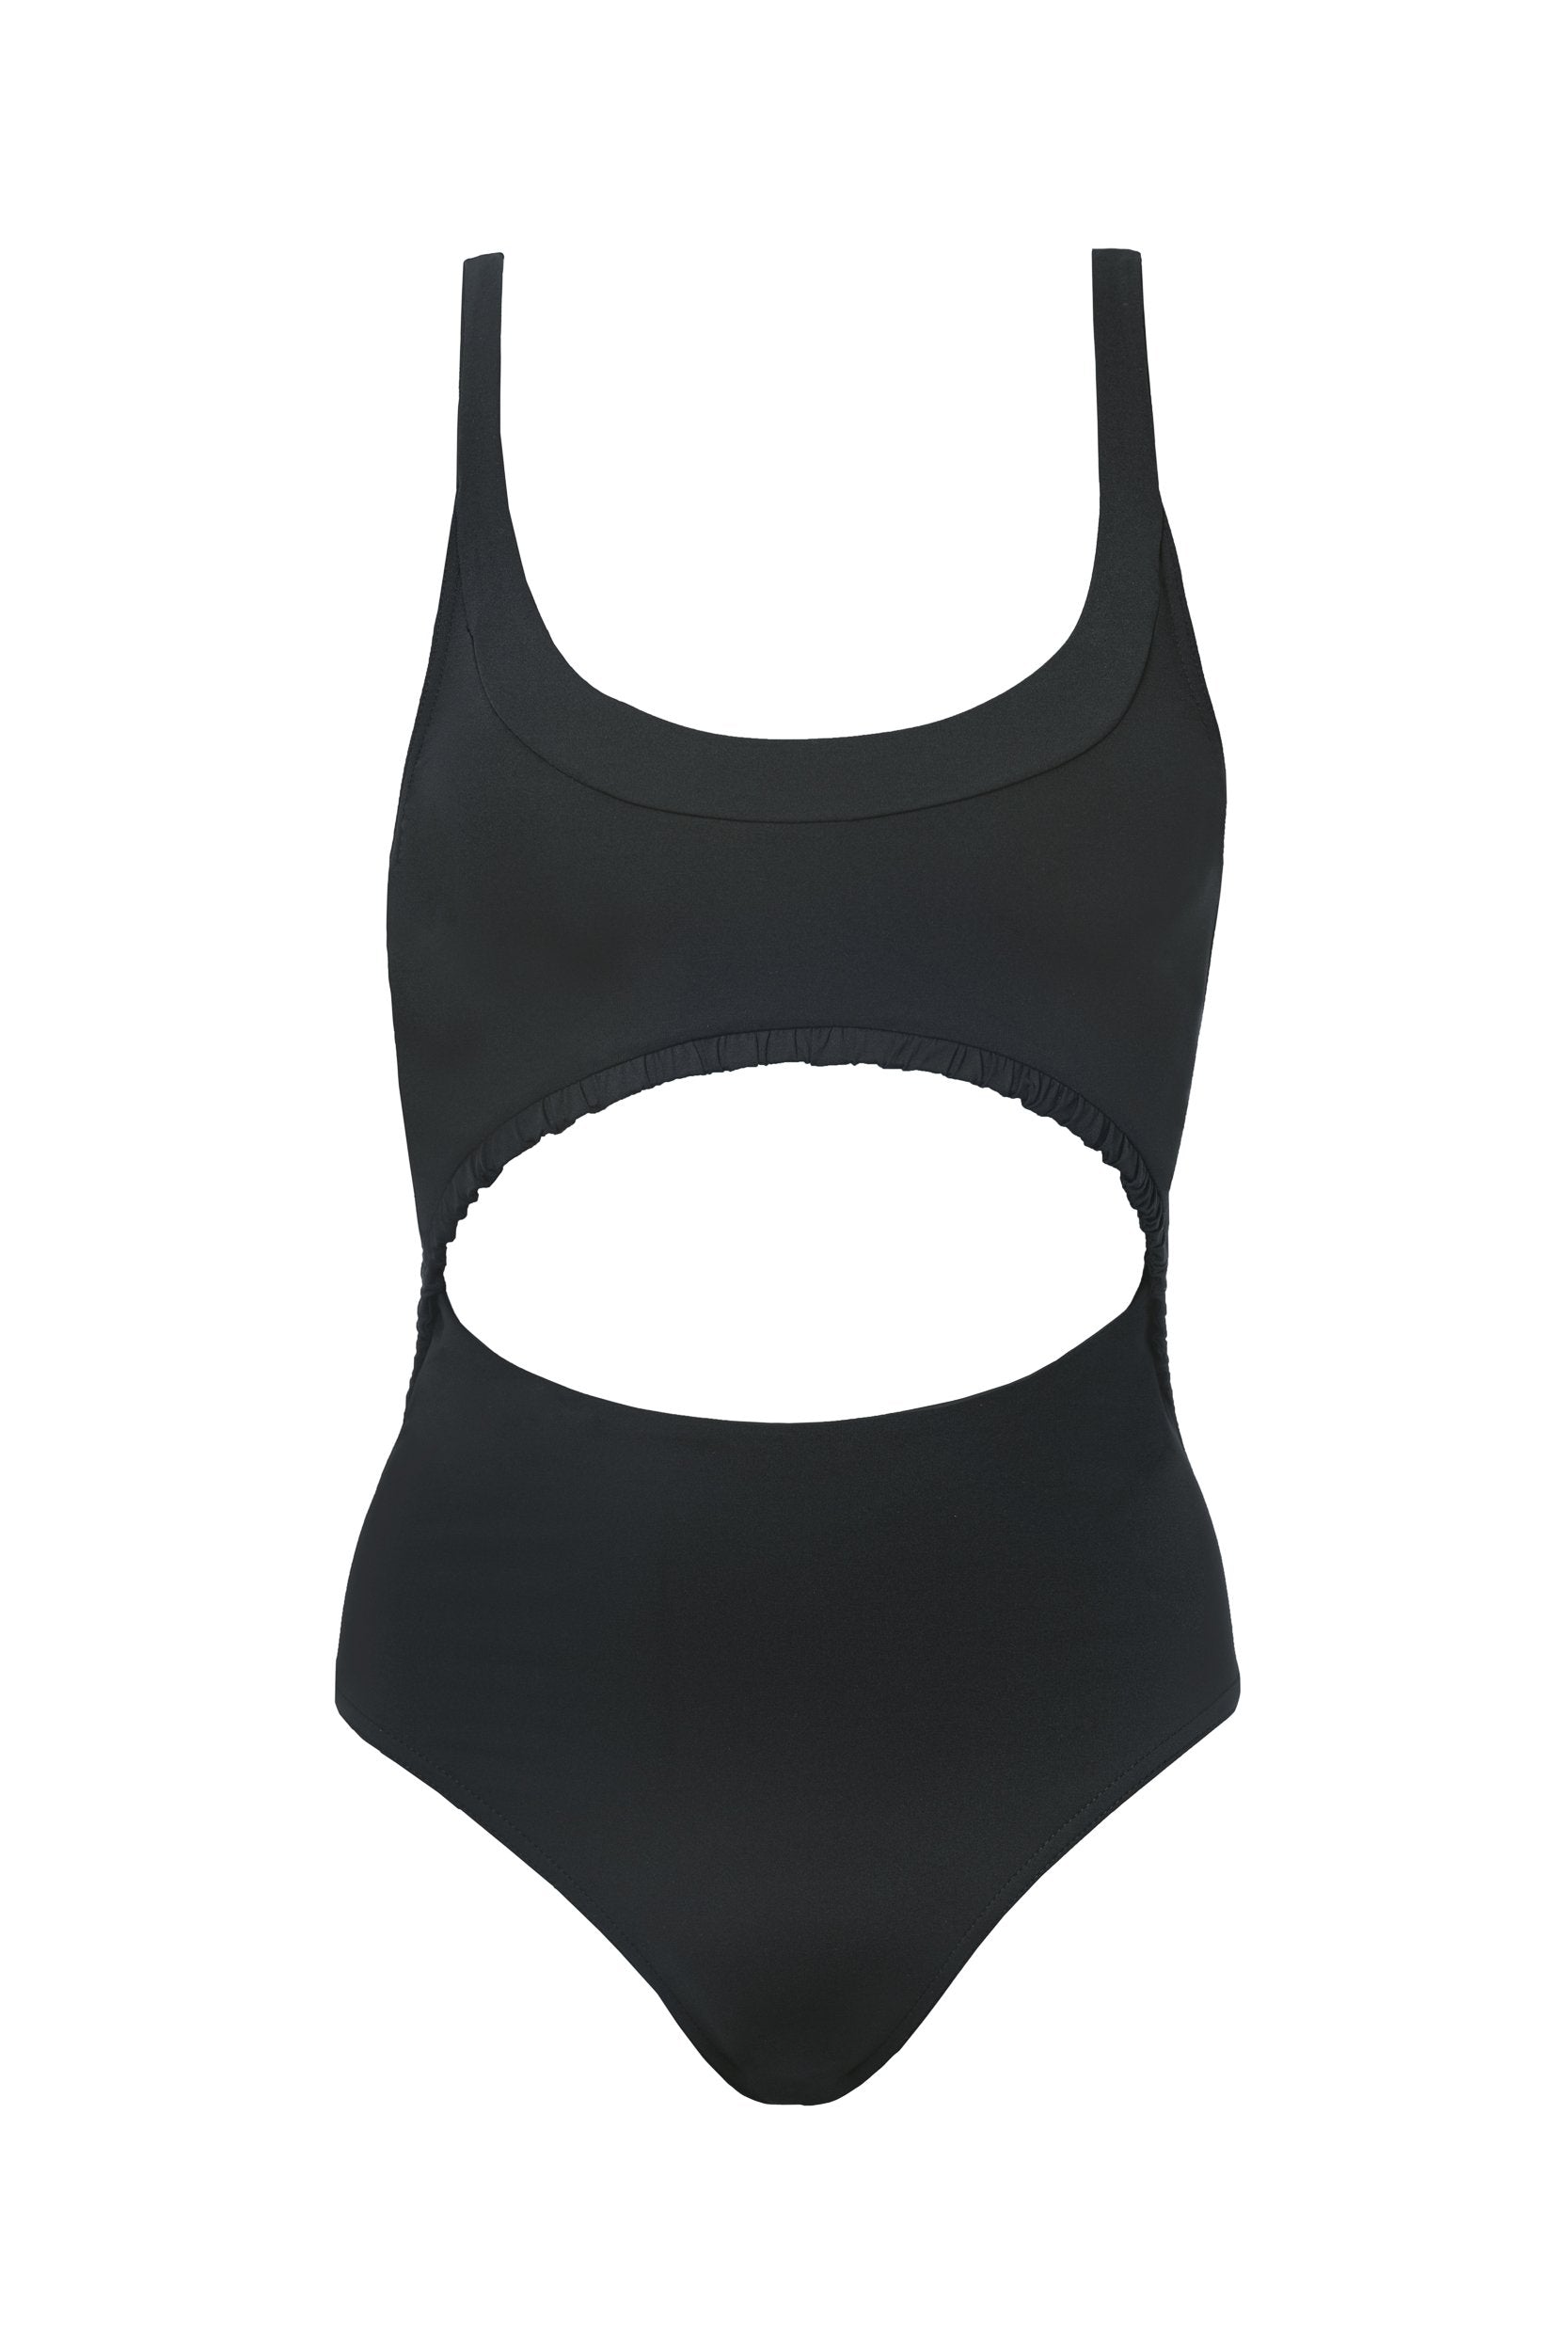 Bonnie in Charcoal Black One-Piece Swimsuit Arloe 